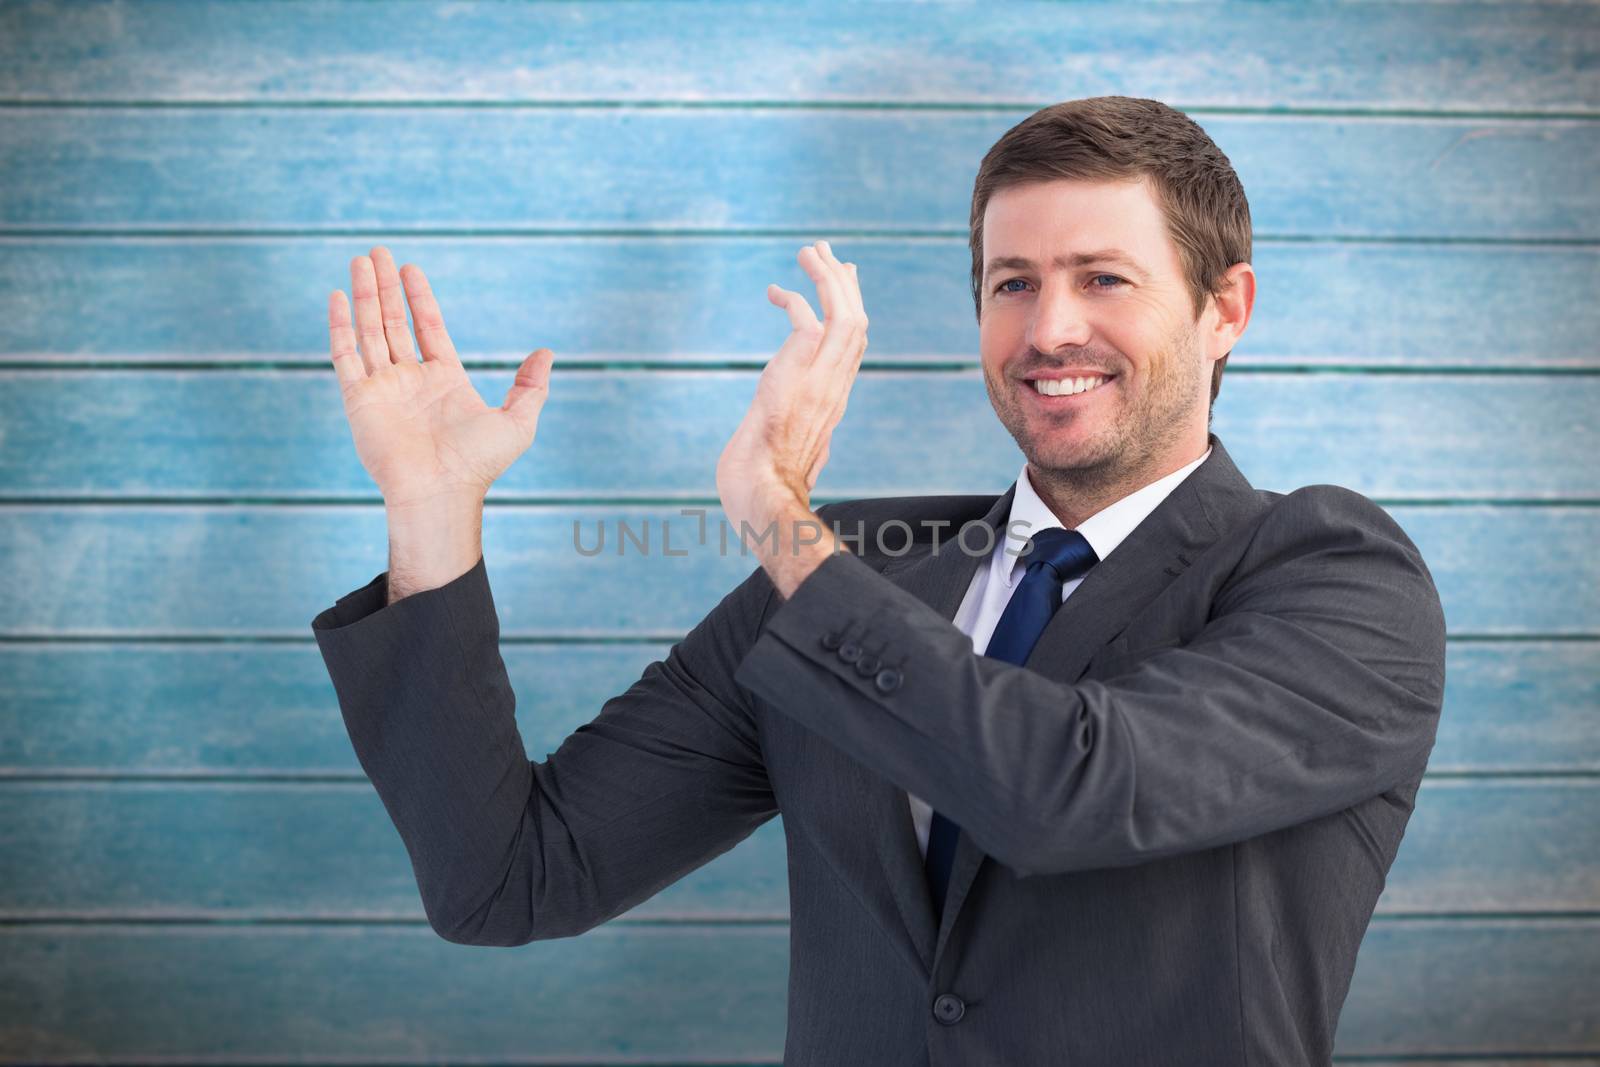 Smiling businessman showing something with his hands against wooden planks